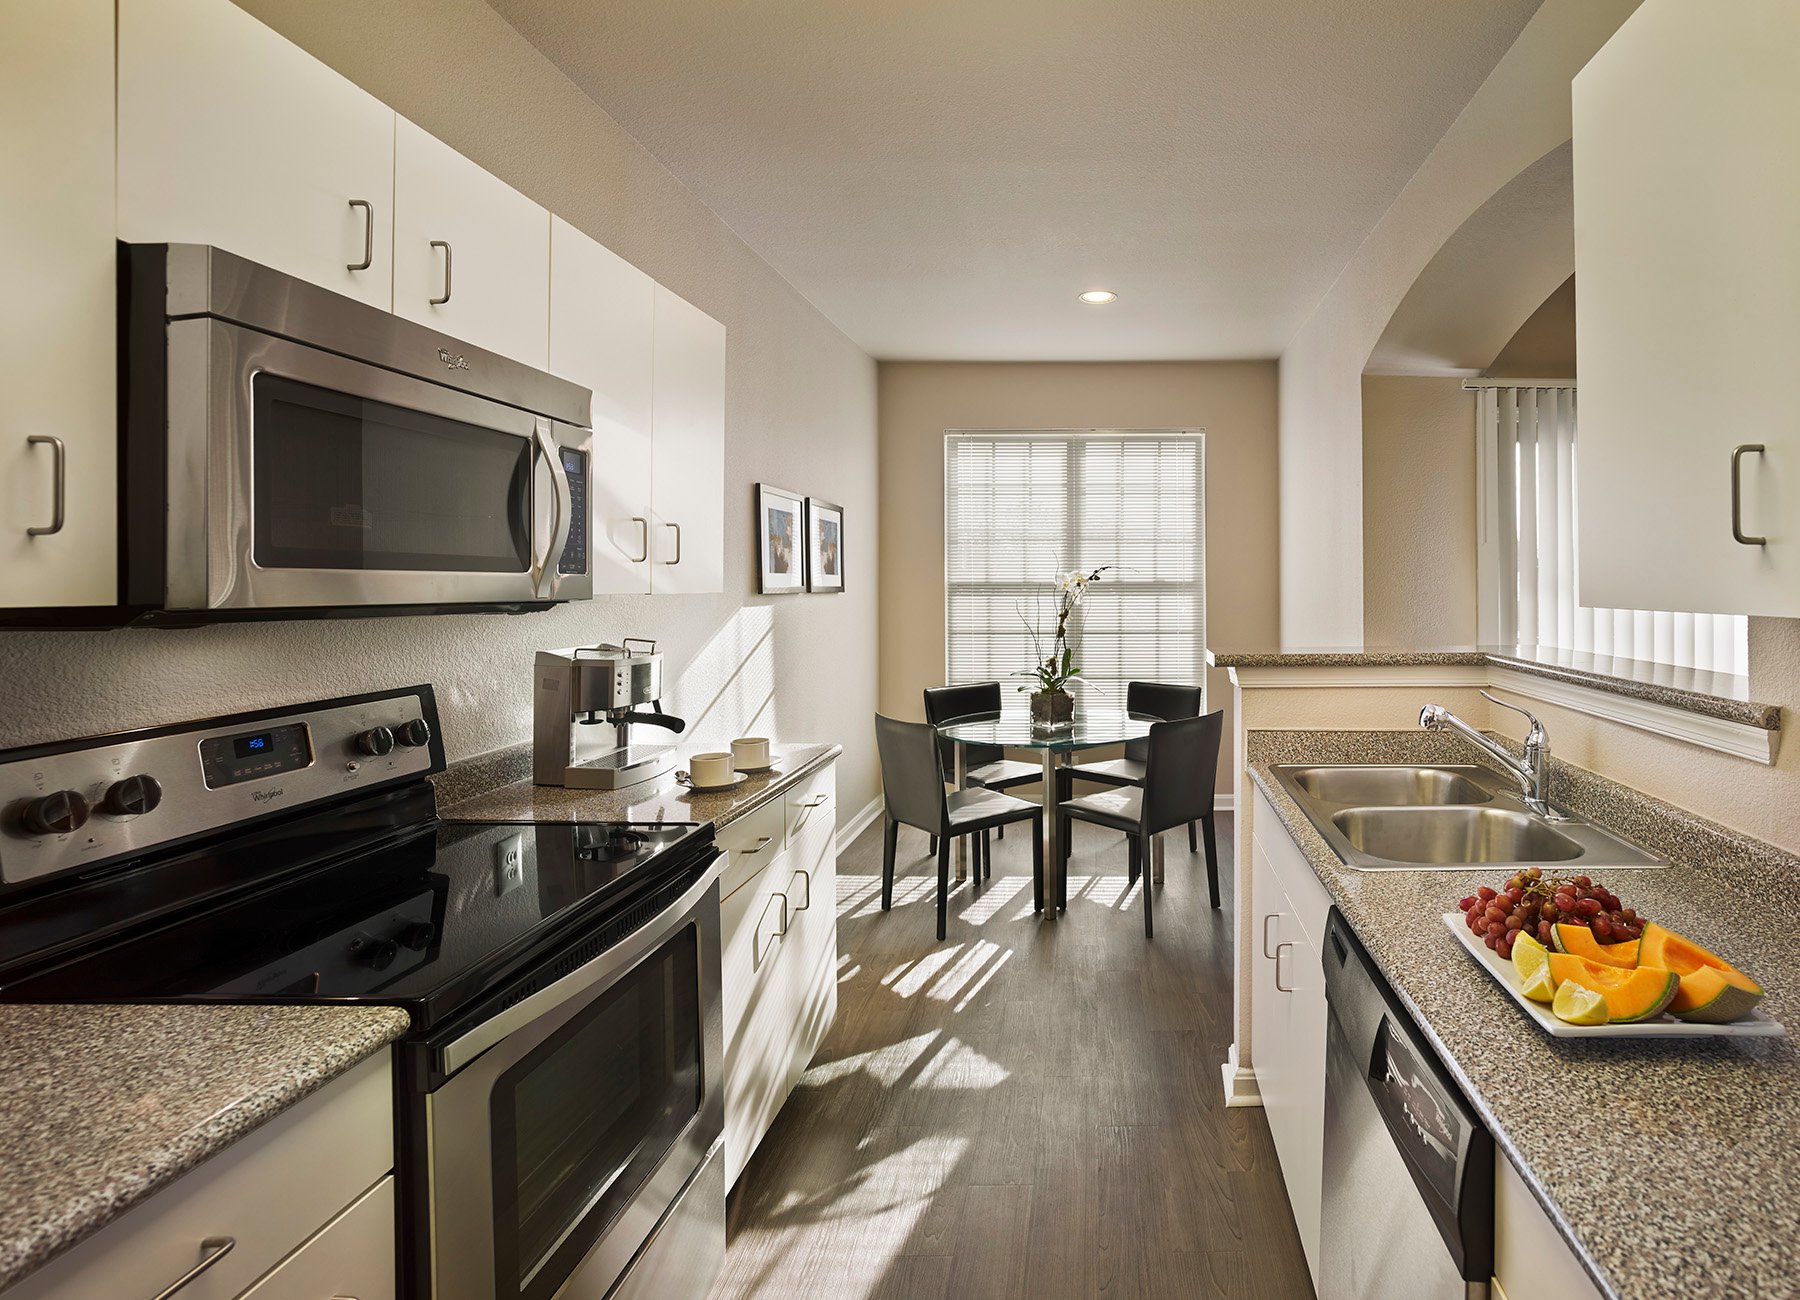 AVE Somerset furnished apartment kitchen with warm colors and accessories